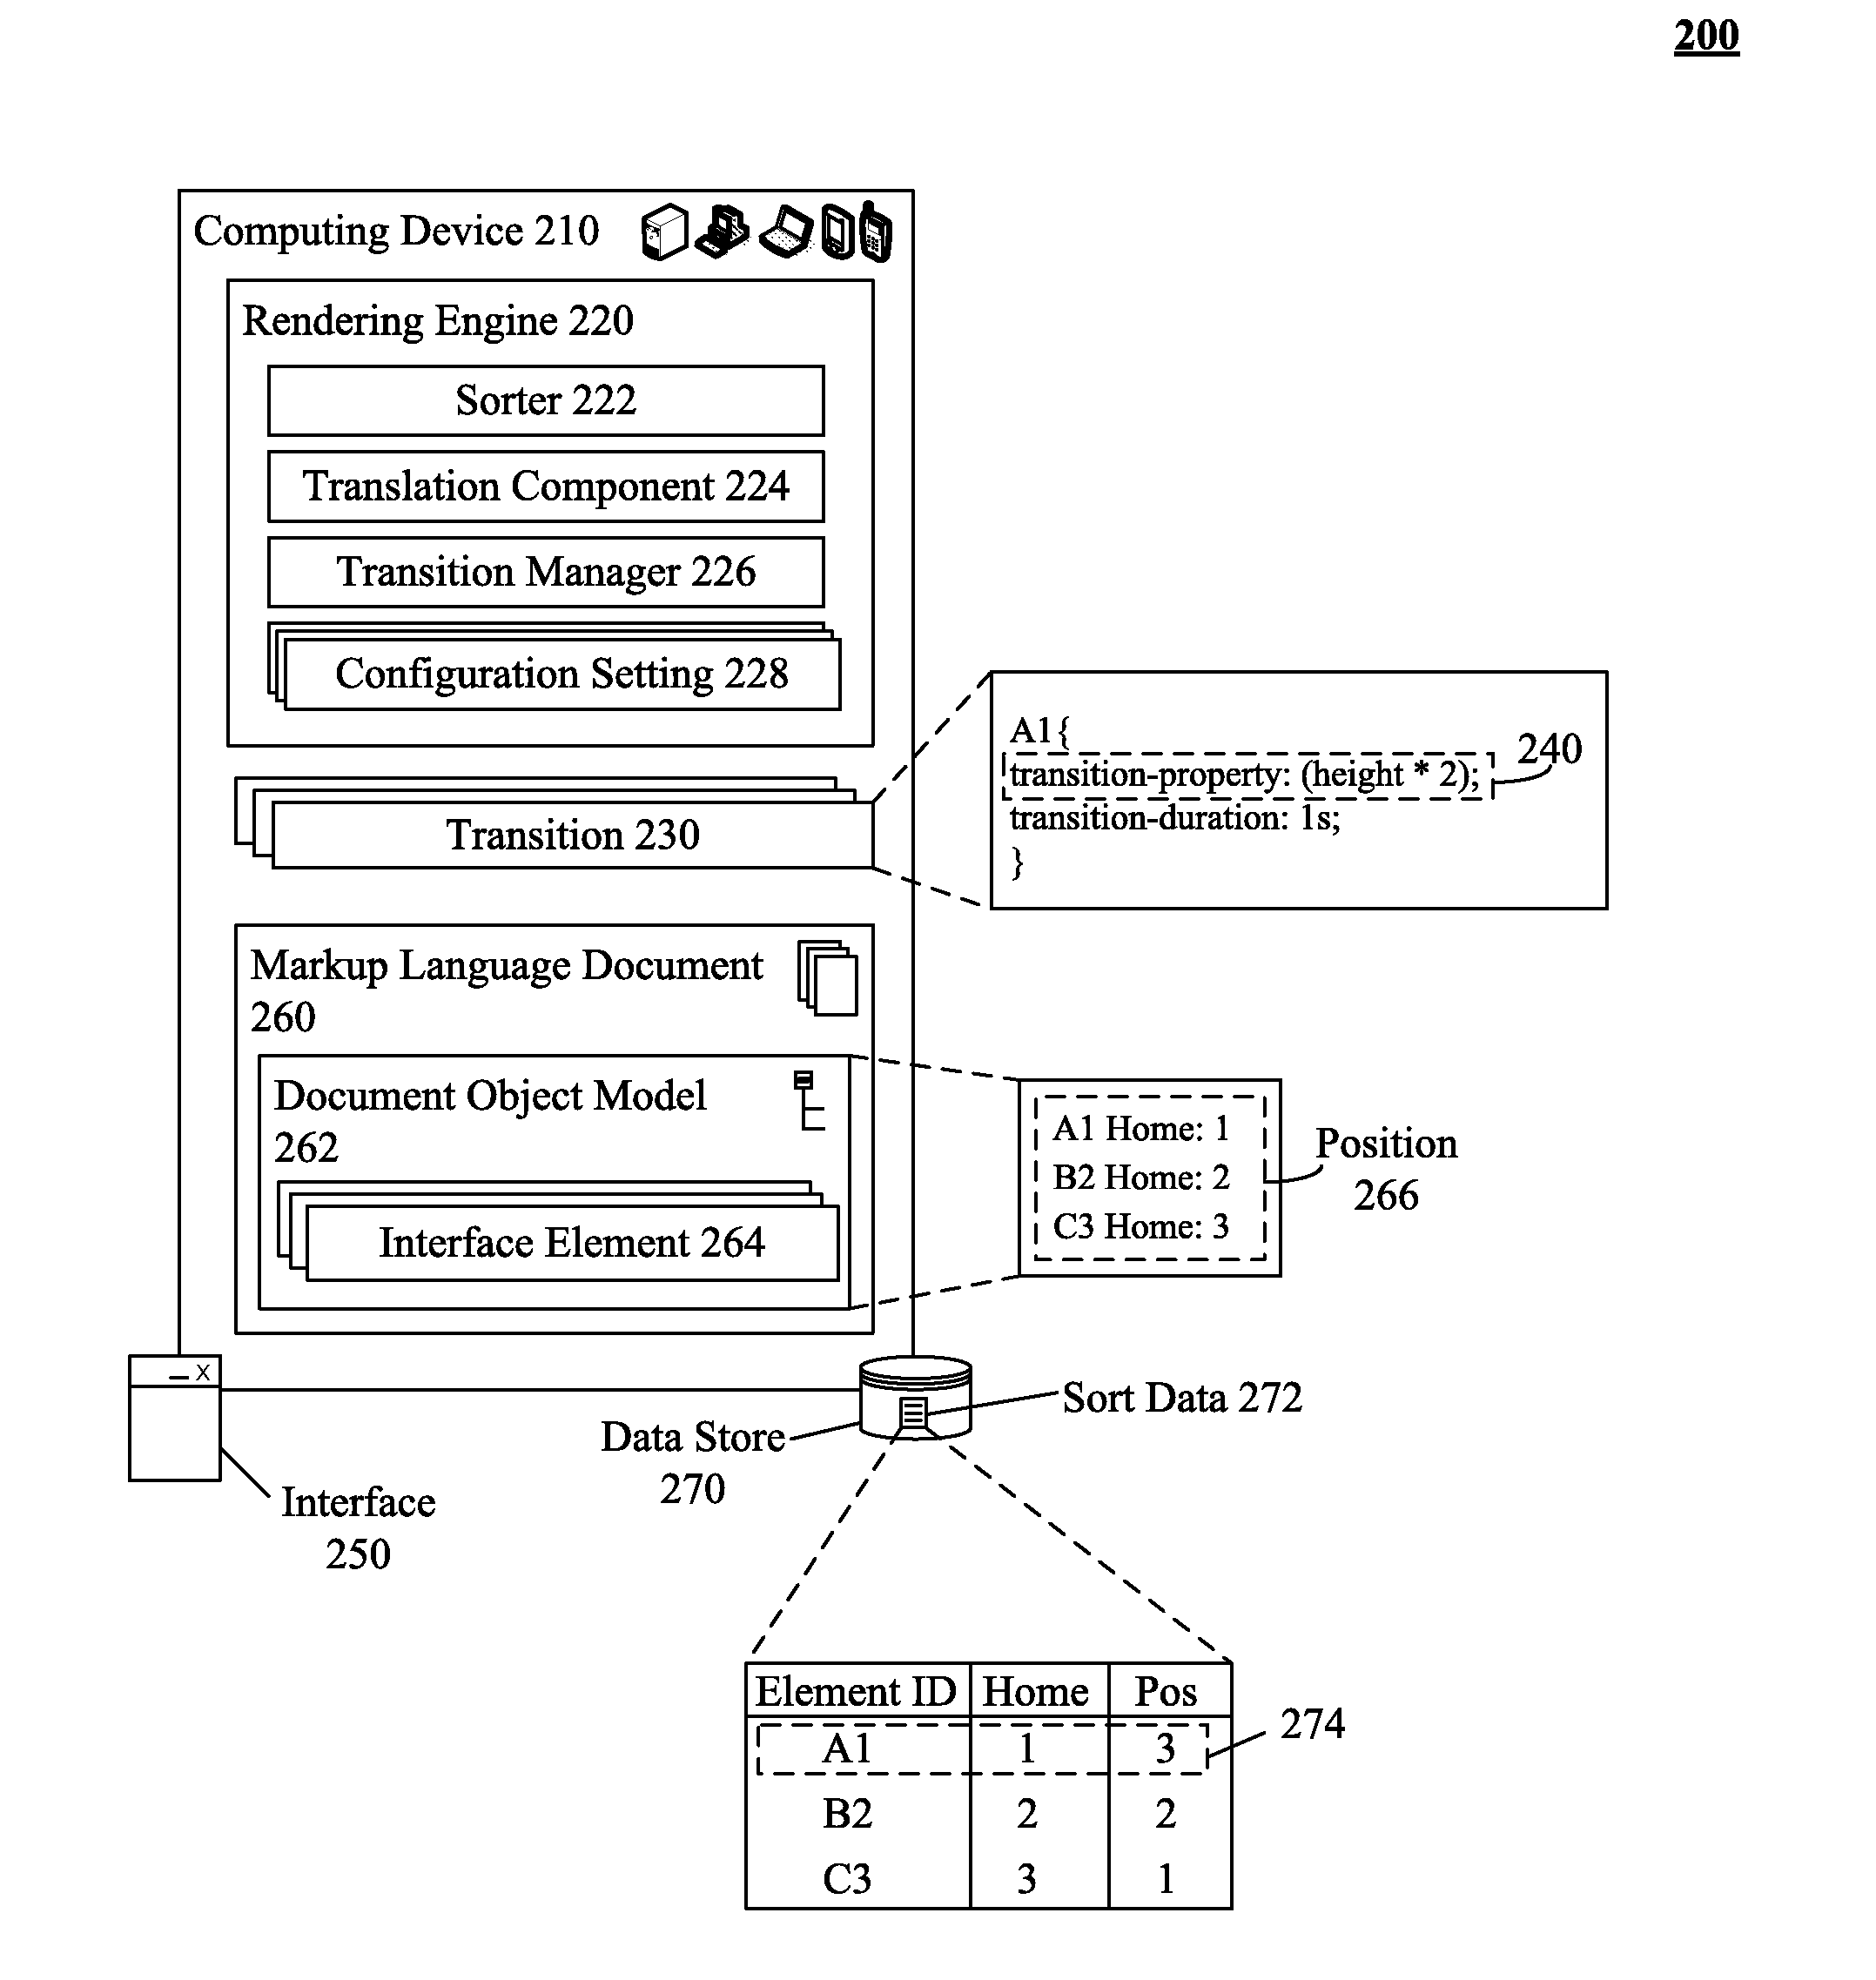 Utilizing a graphical transition to sort an interface element independently of a document object model